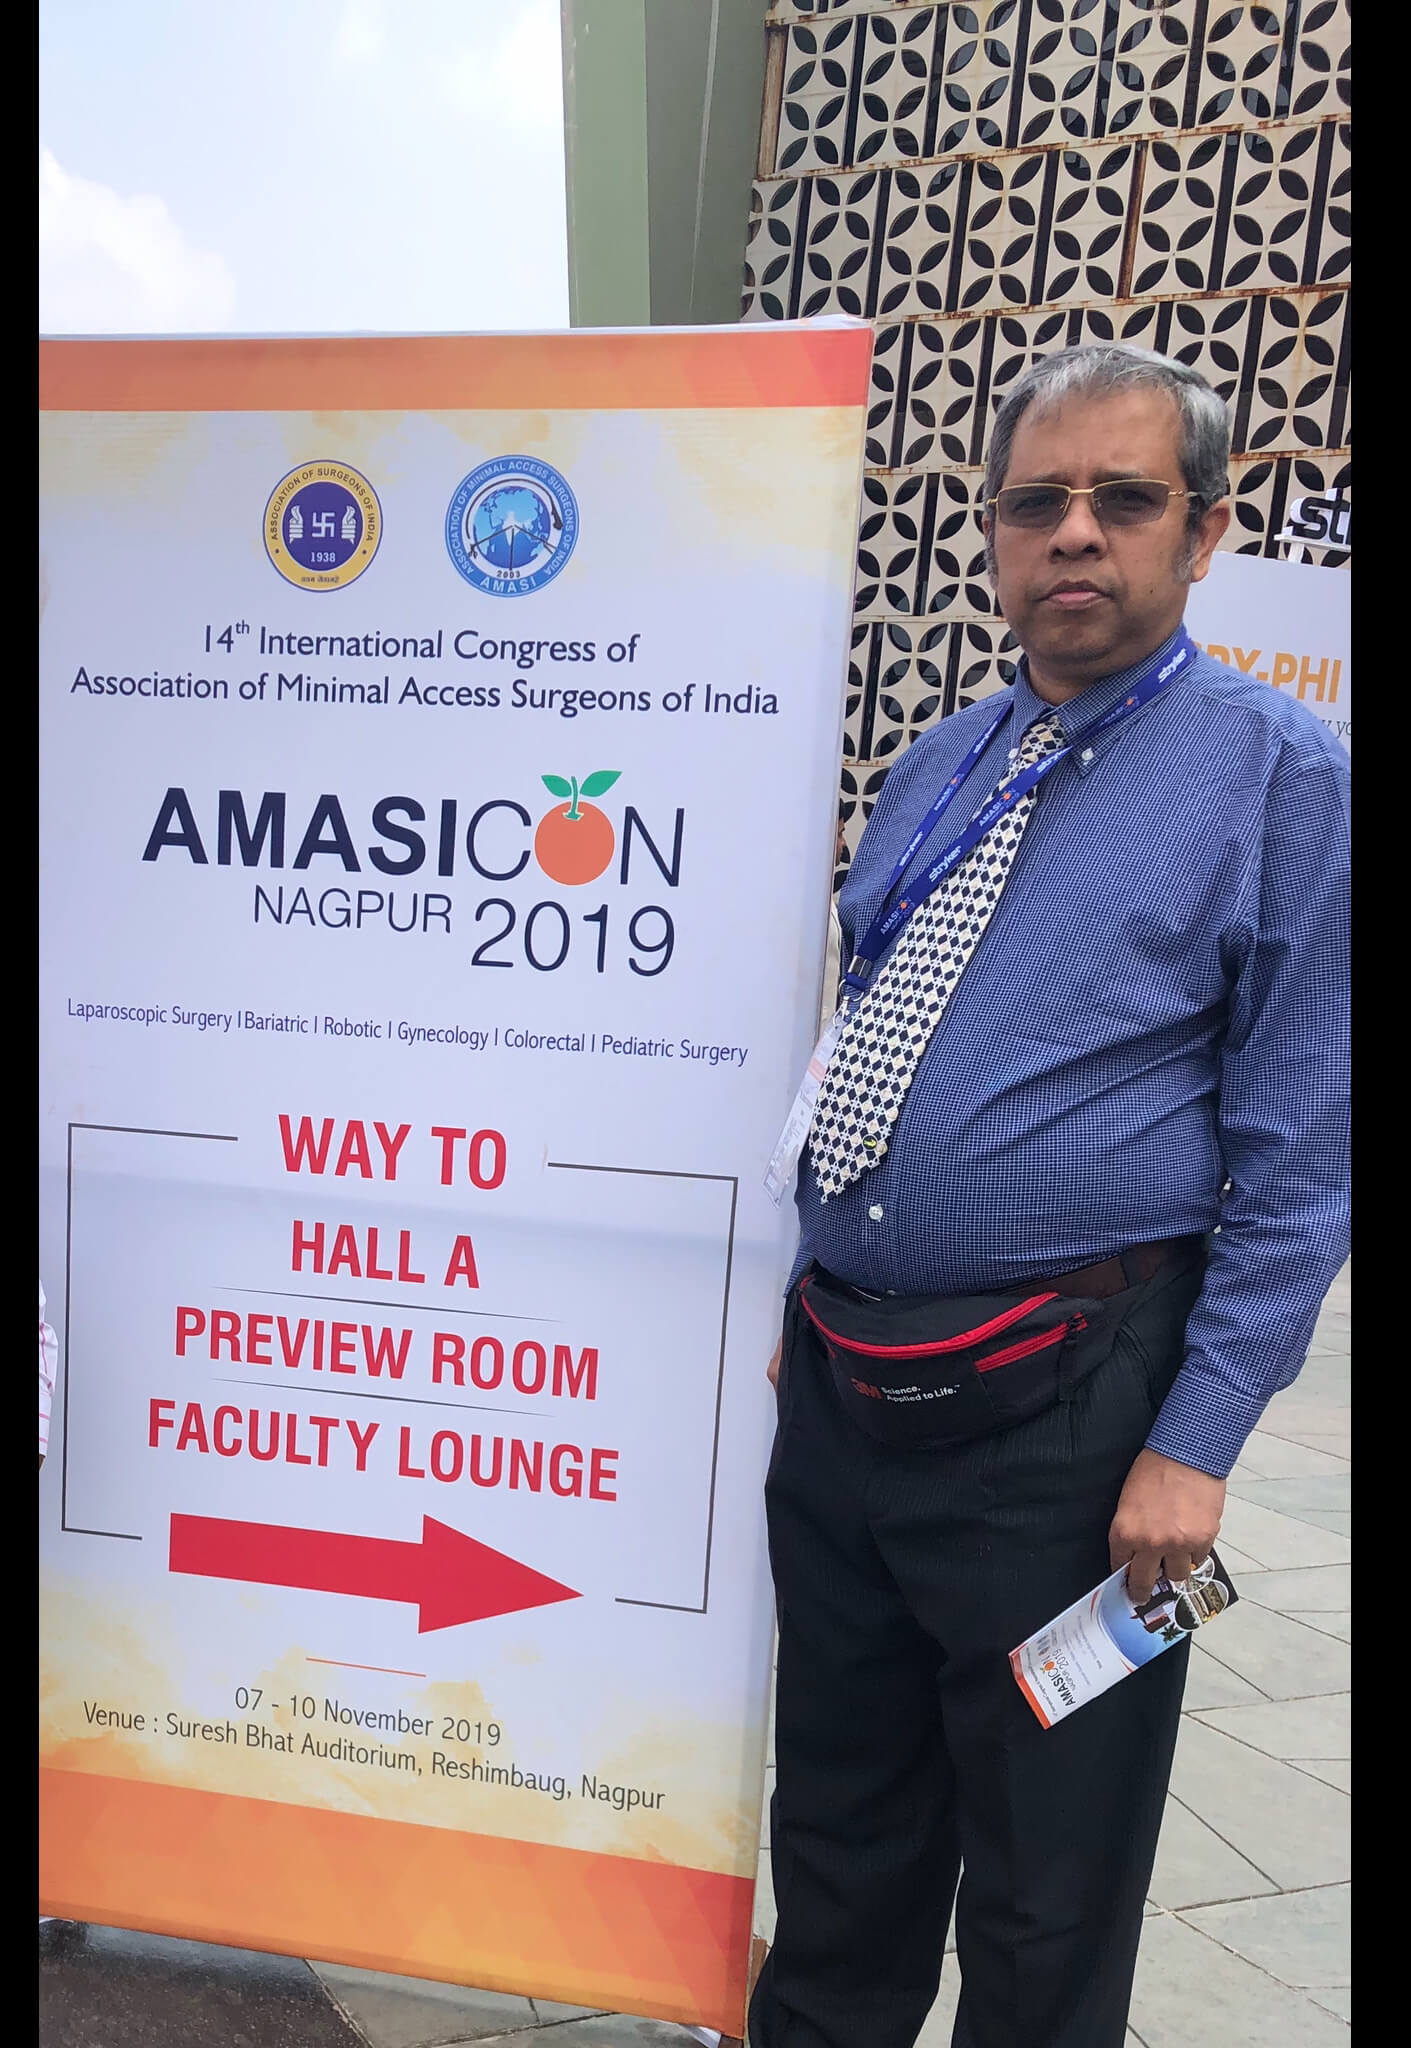 Attending AMASICON 2019 in Nagpur, India